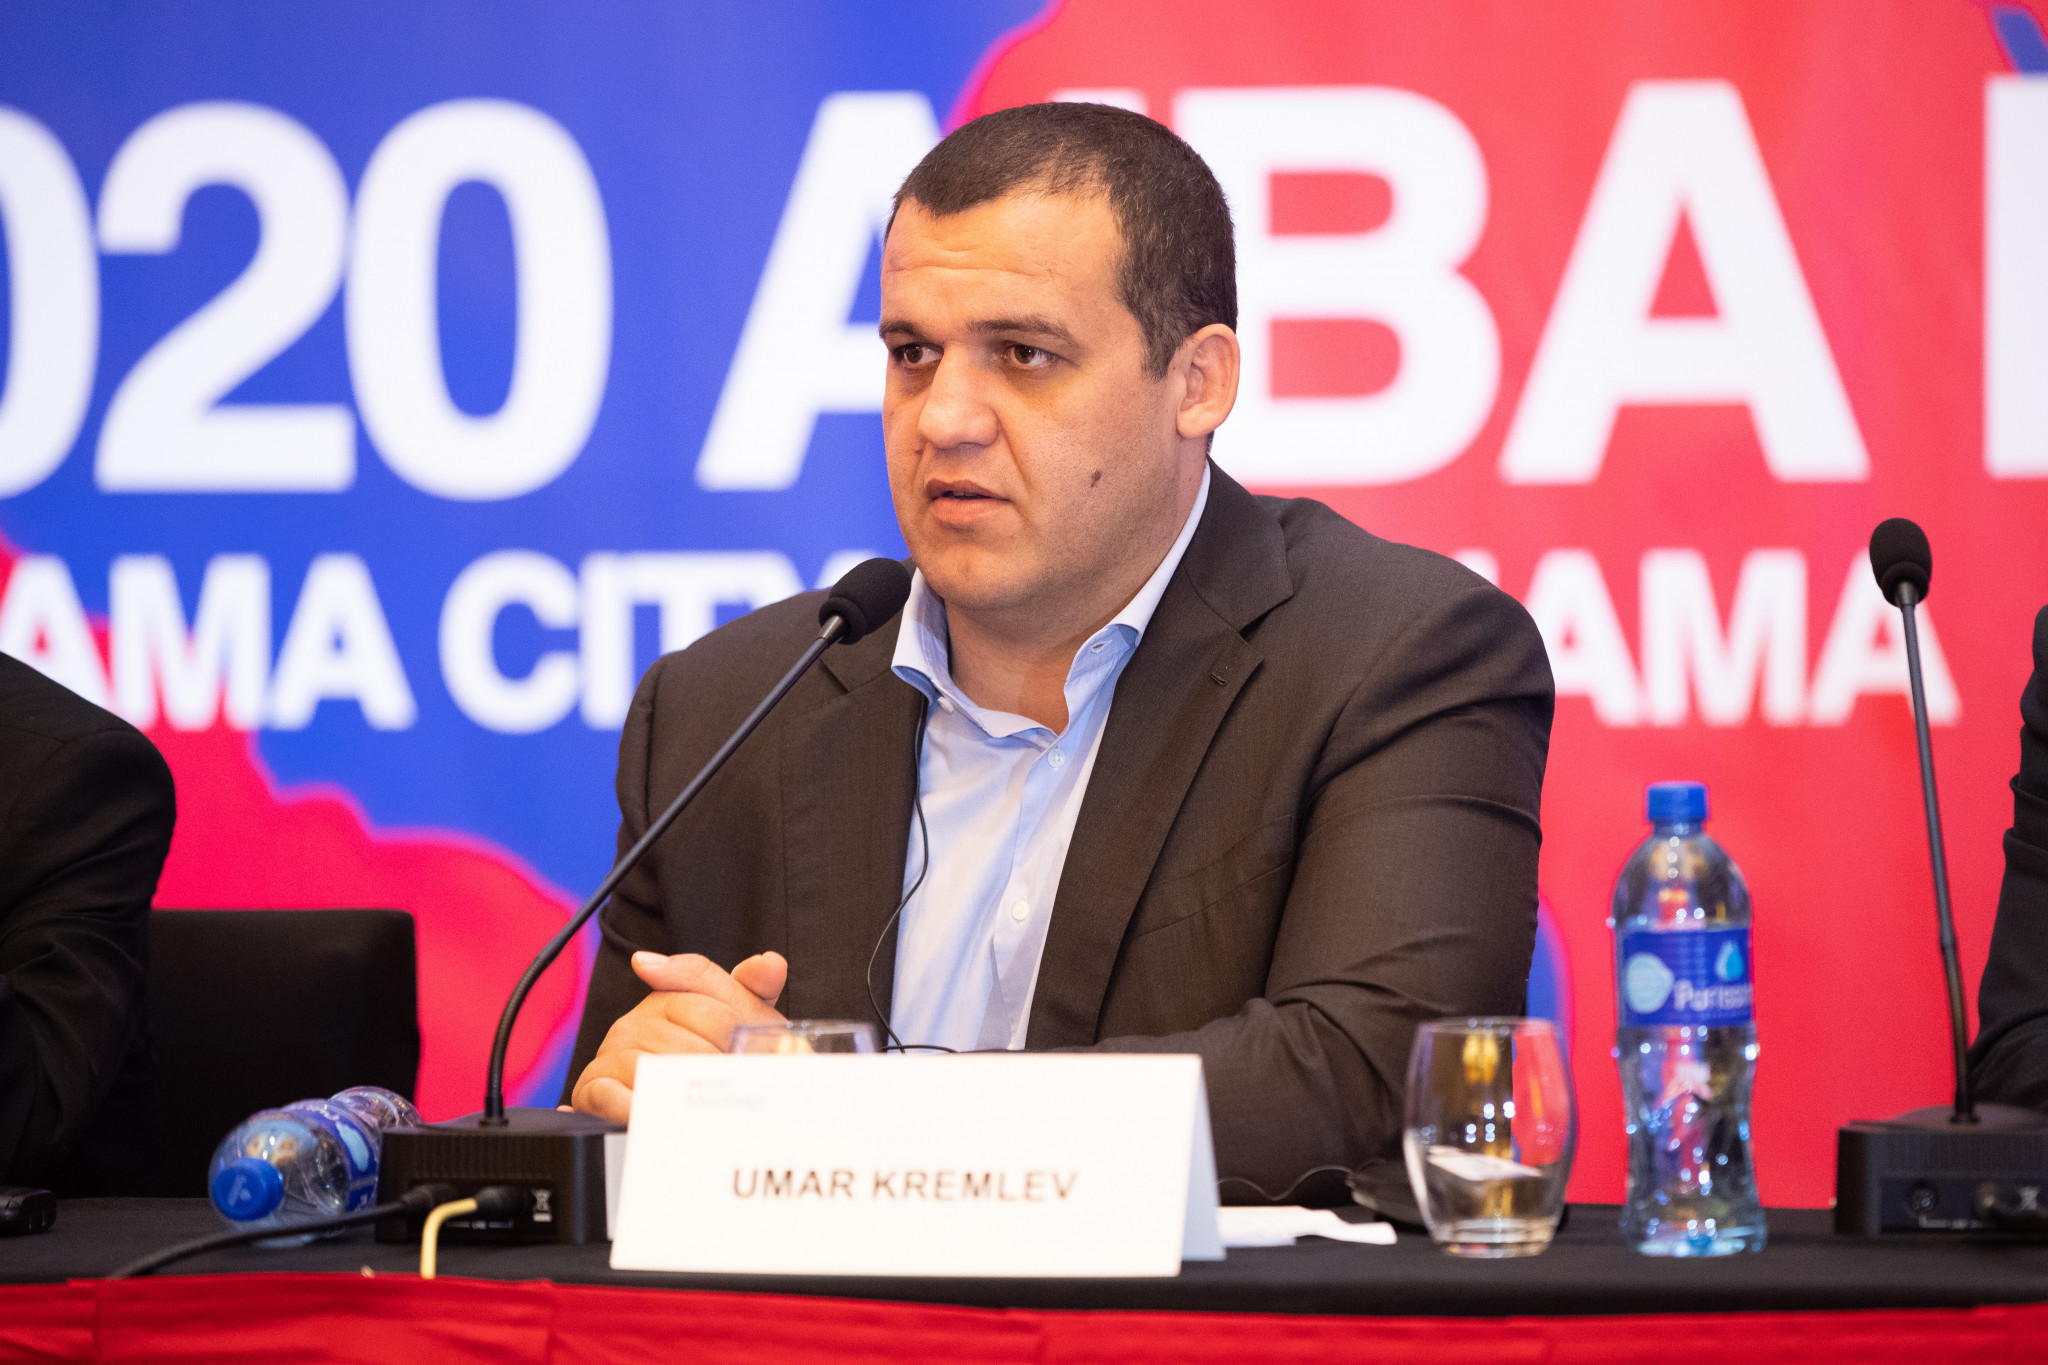 AIBA President Umar Kremlev said the extension of the agreement with the ITA was proof that AIBA was fully committed to clean sports ©AIBA